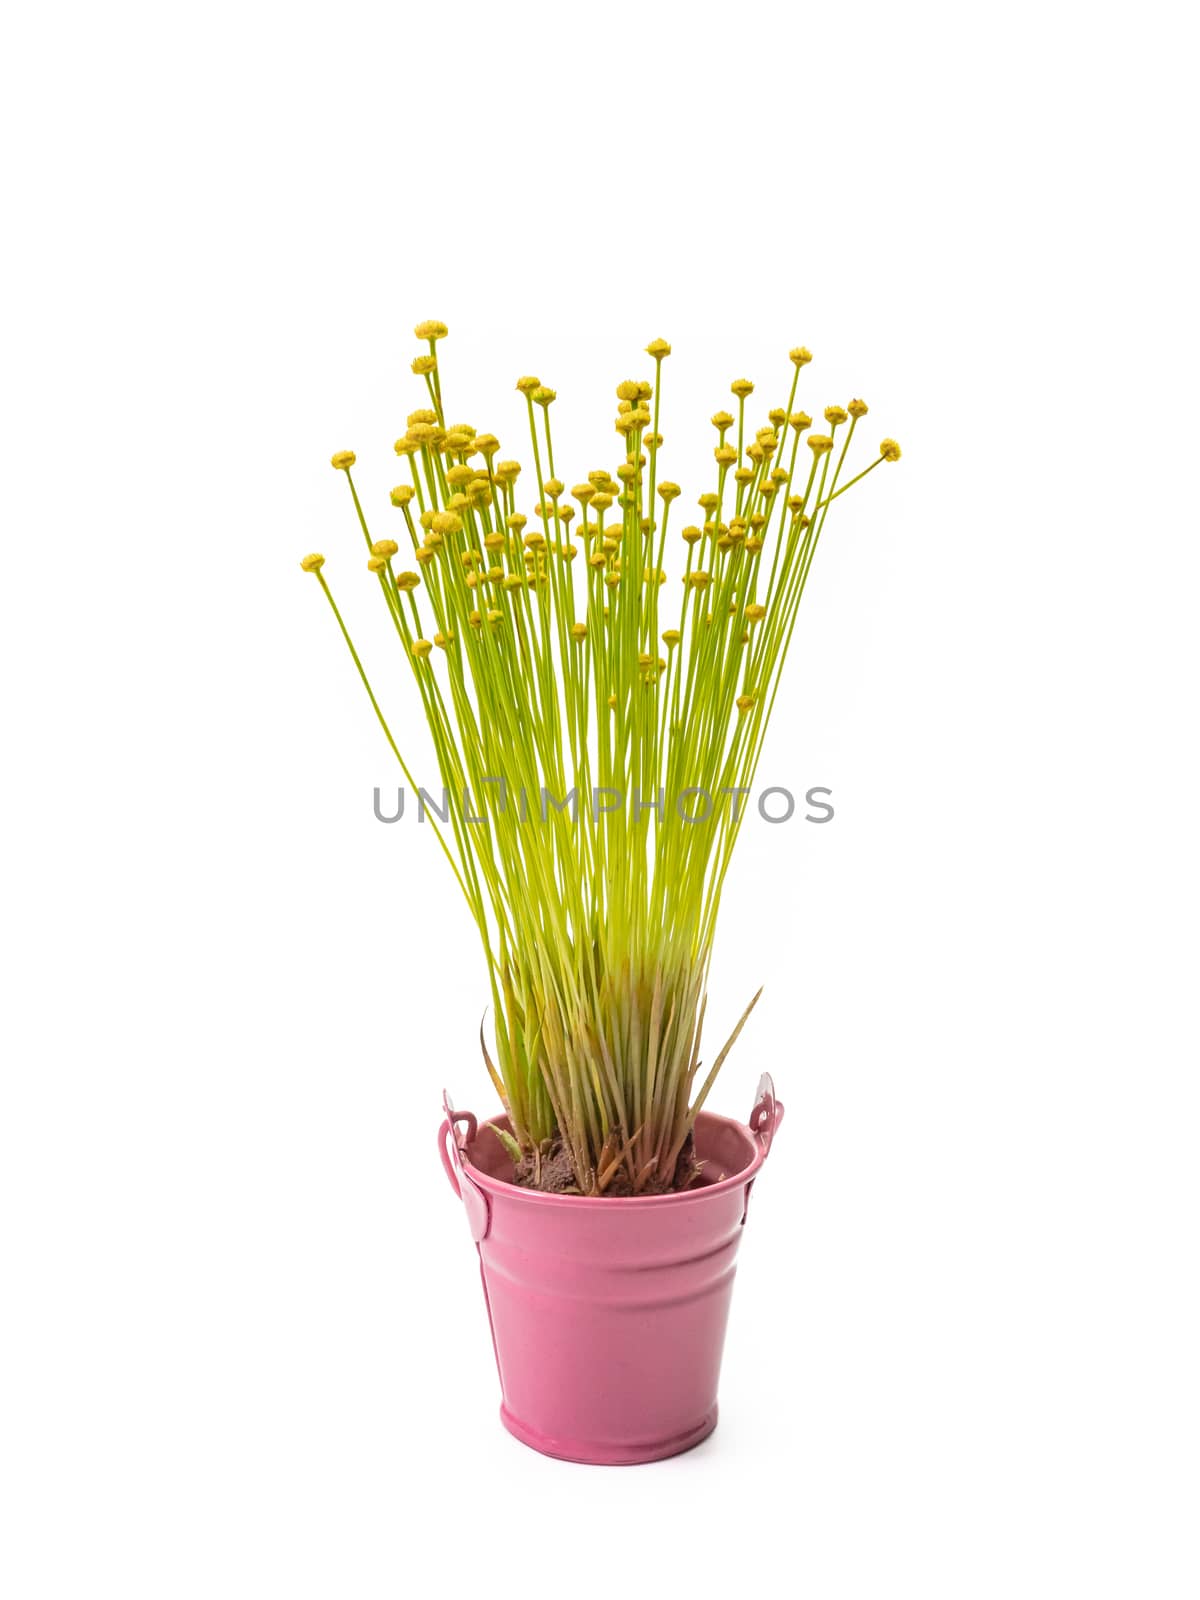 The Lachnocaulon bog button flower plant (La Ong Dao) in small pink pot. by phasuthorn